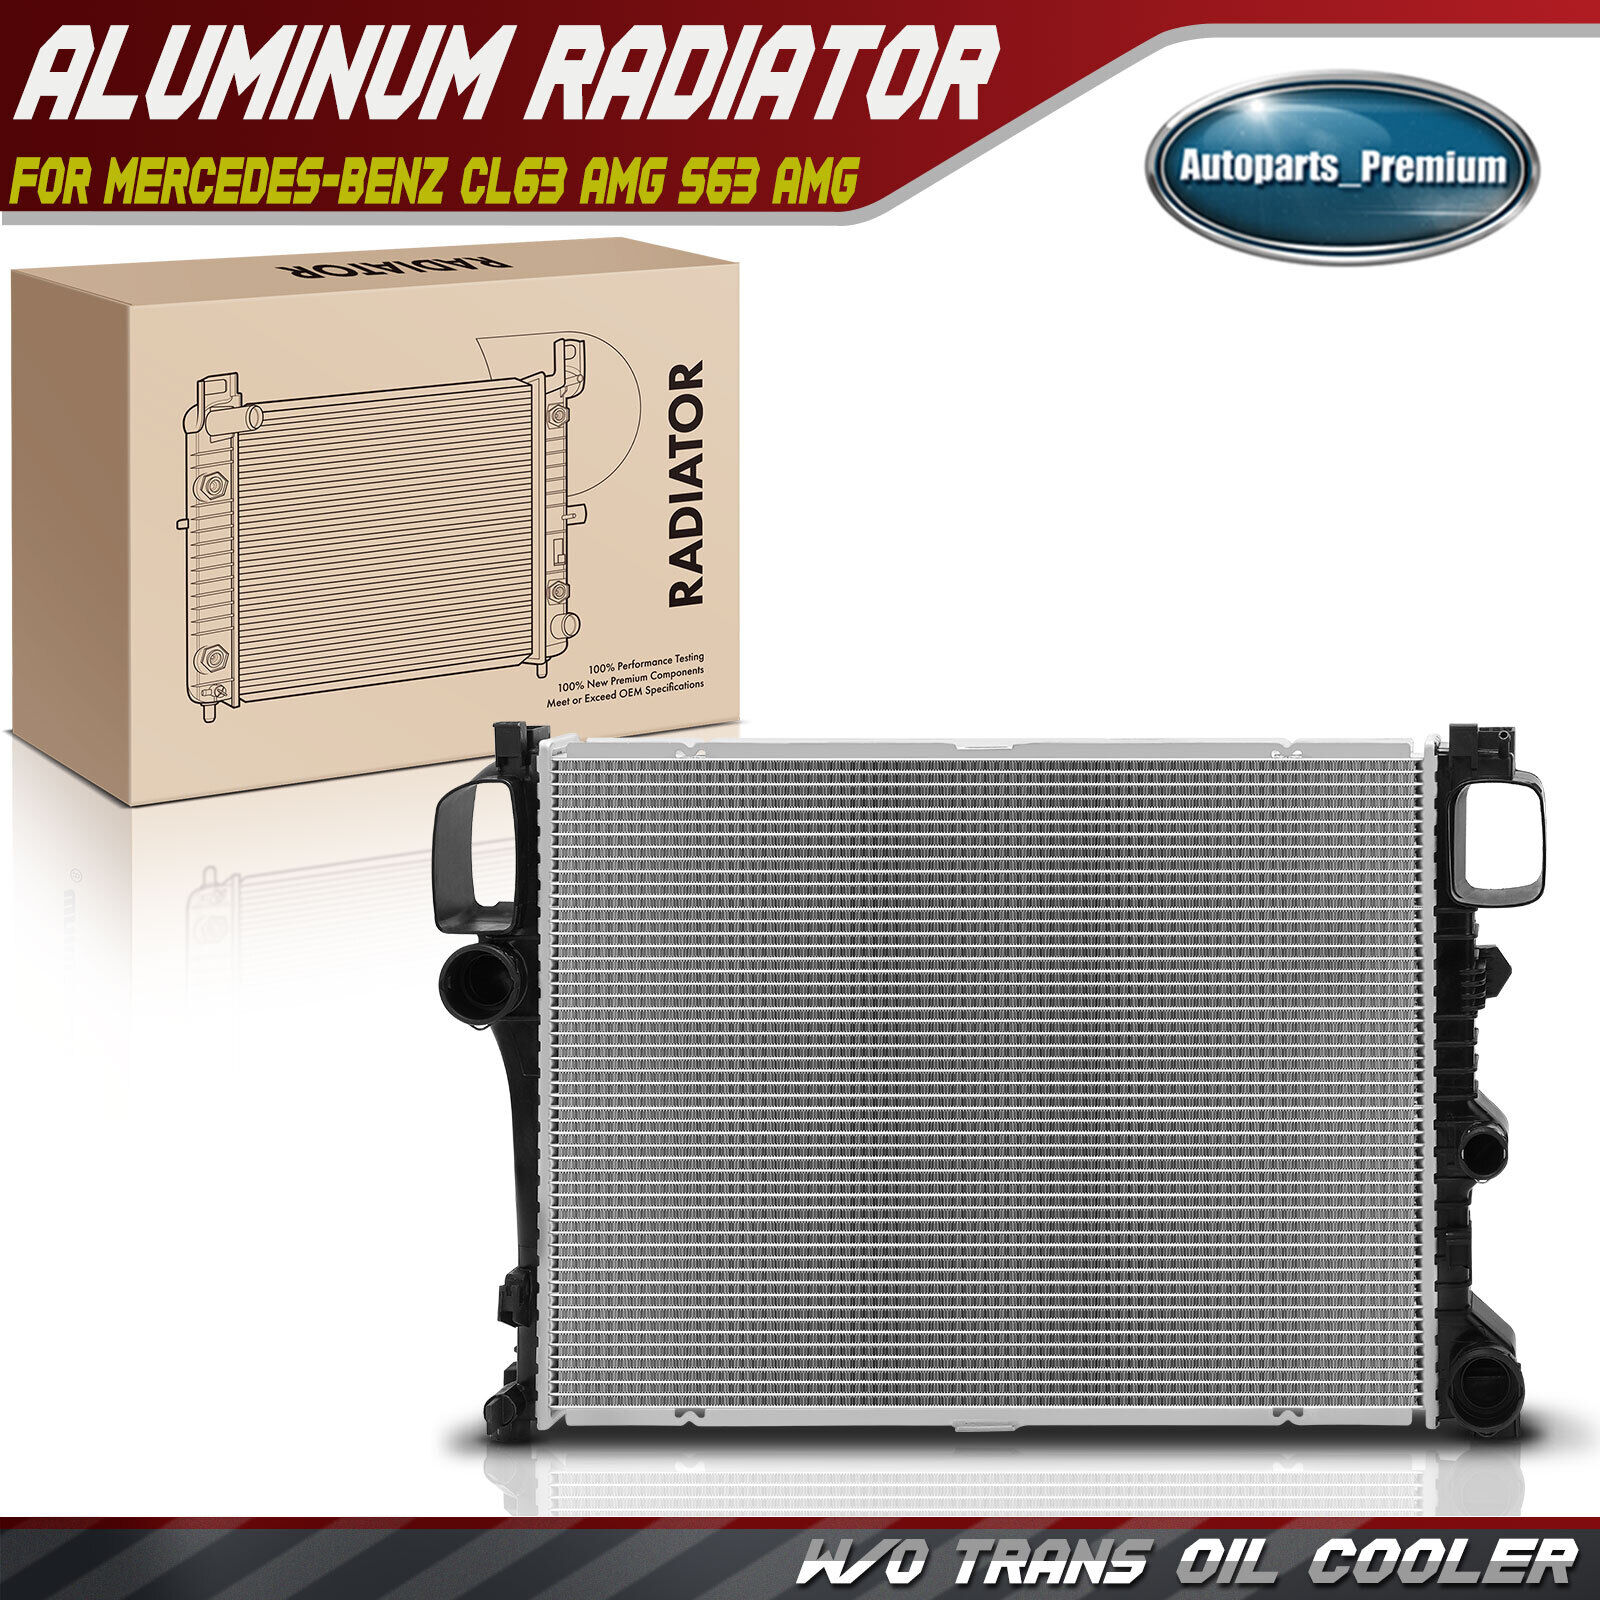 Radiator without Oil Cooler for Mercedes-Benz CL63 AMG S63 AMG CL600 S550 S600